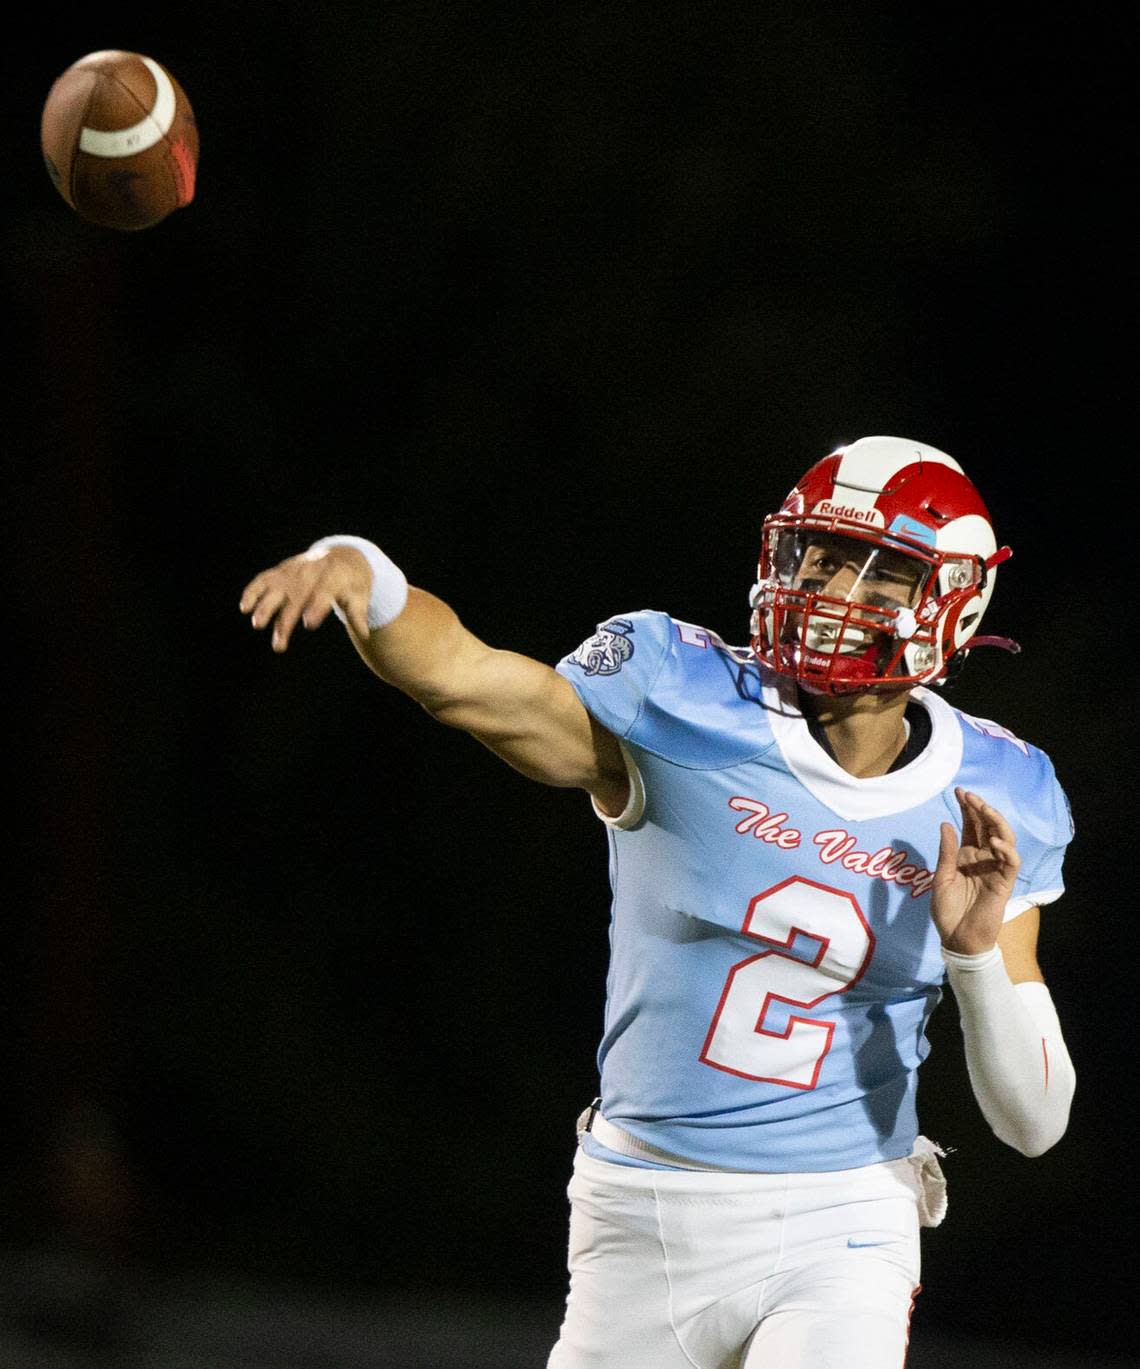 West Valley’s Skyler Cassel has been one of the top quarterbacks in the state in the 2022 season.